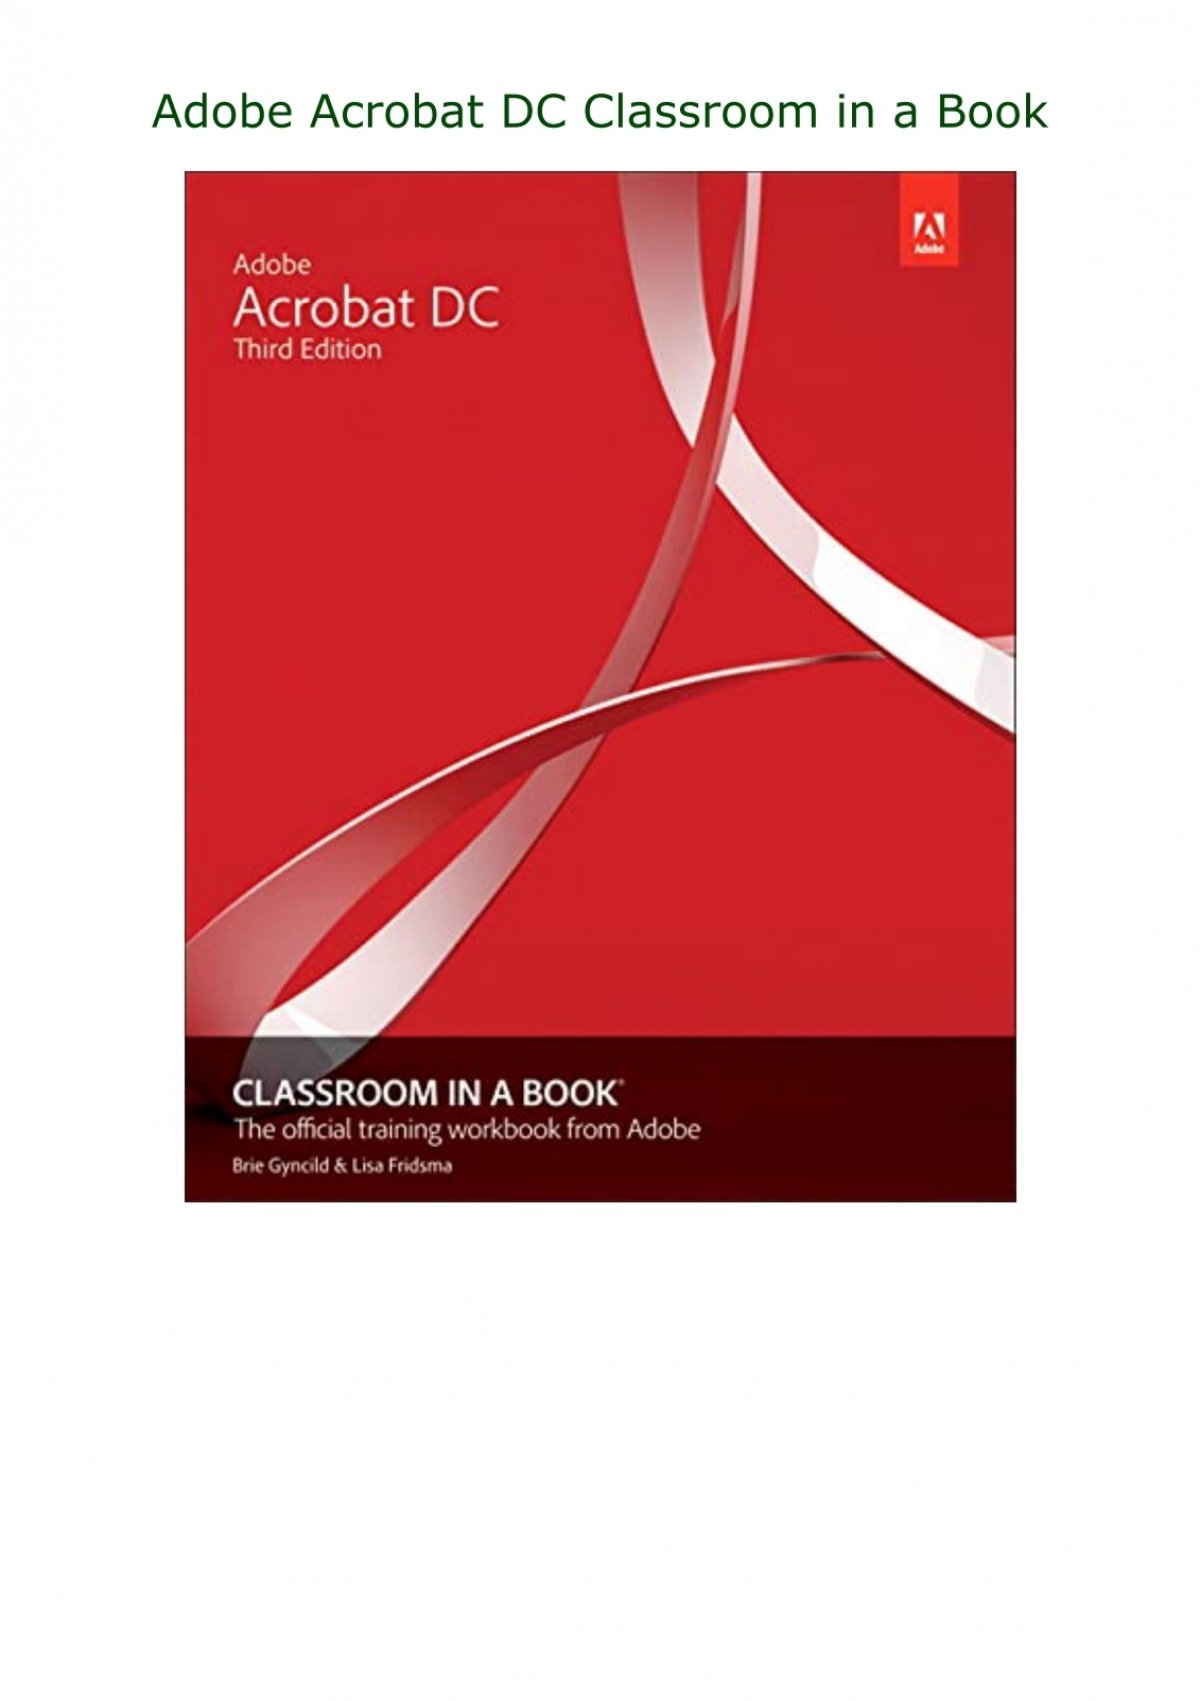 adobe acrobat dc classroom in a book free download